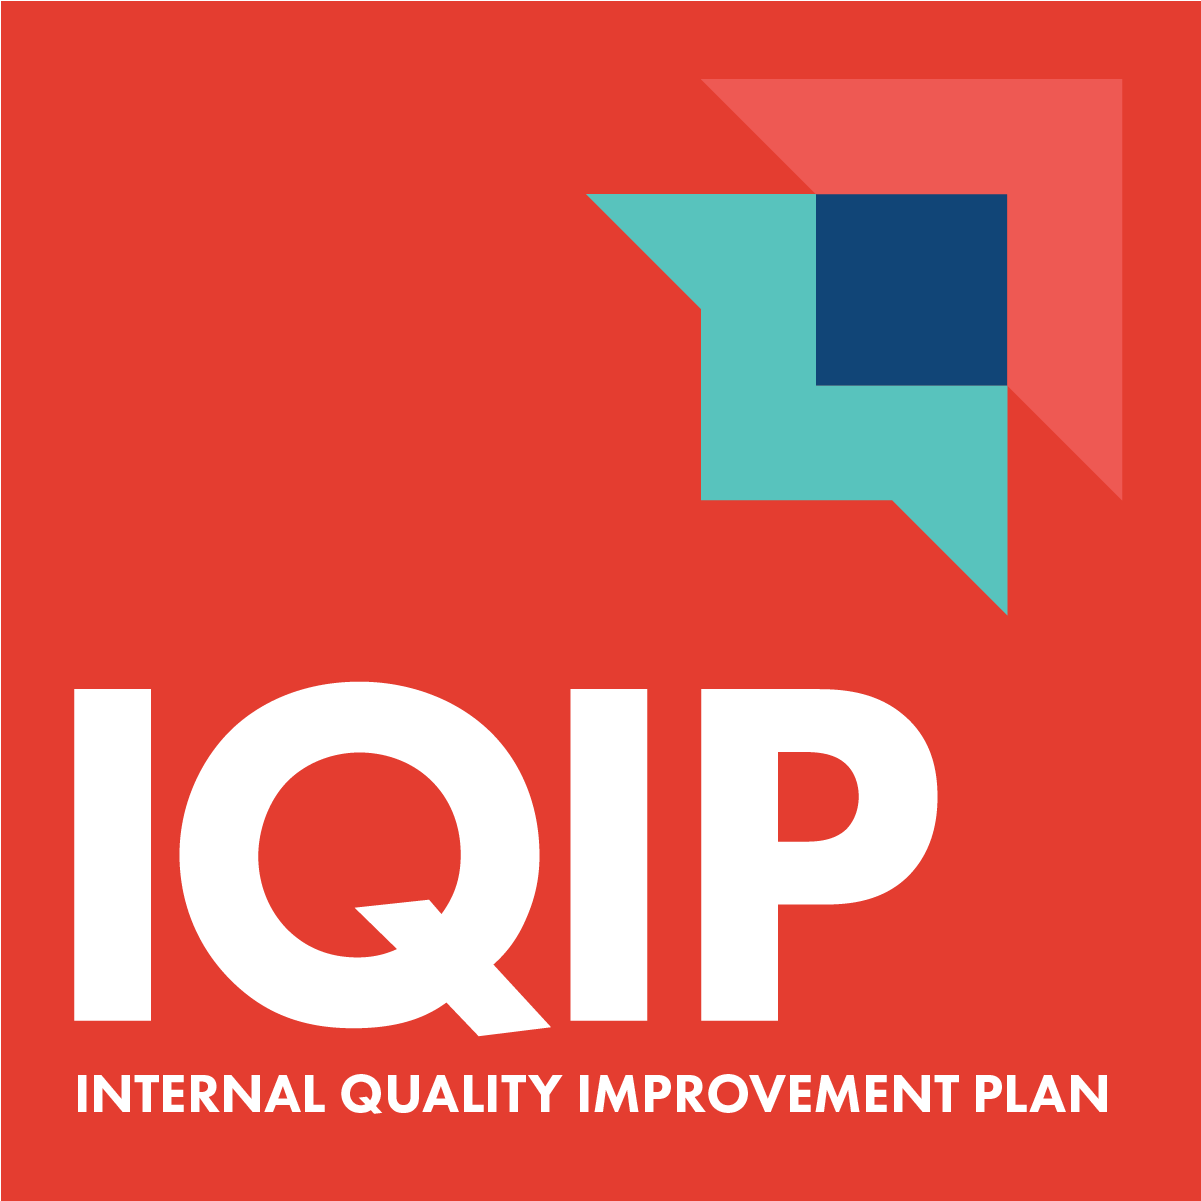 The FirstClass Healthcare Internal Quality Improvement Plan (IQIP) aims to establish a systematic framework to enhance patient safety and the quality of healthcare services we provide.